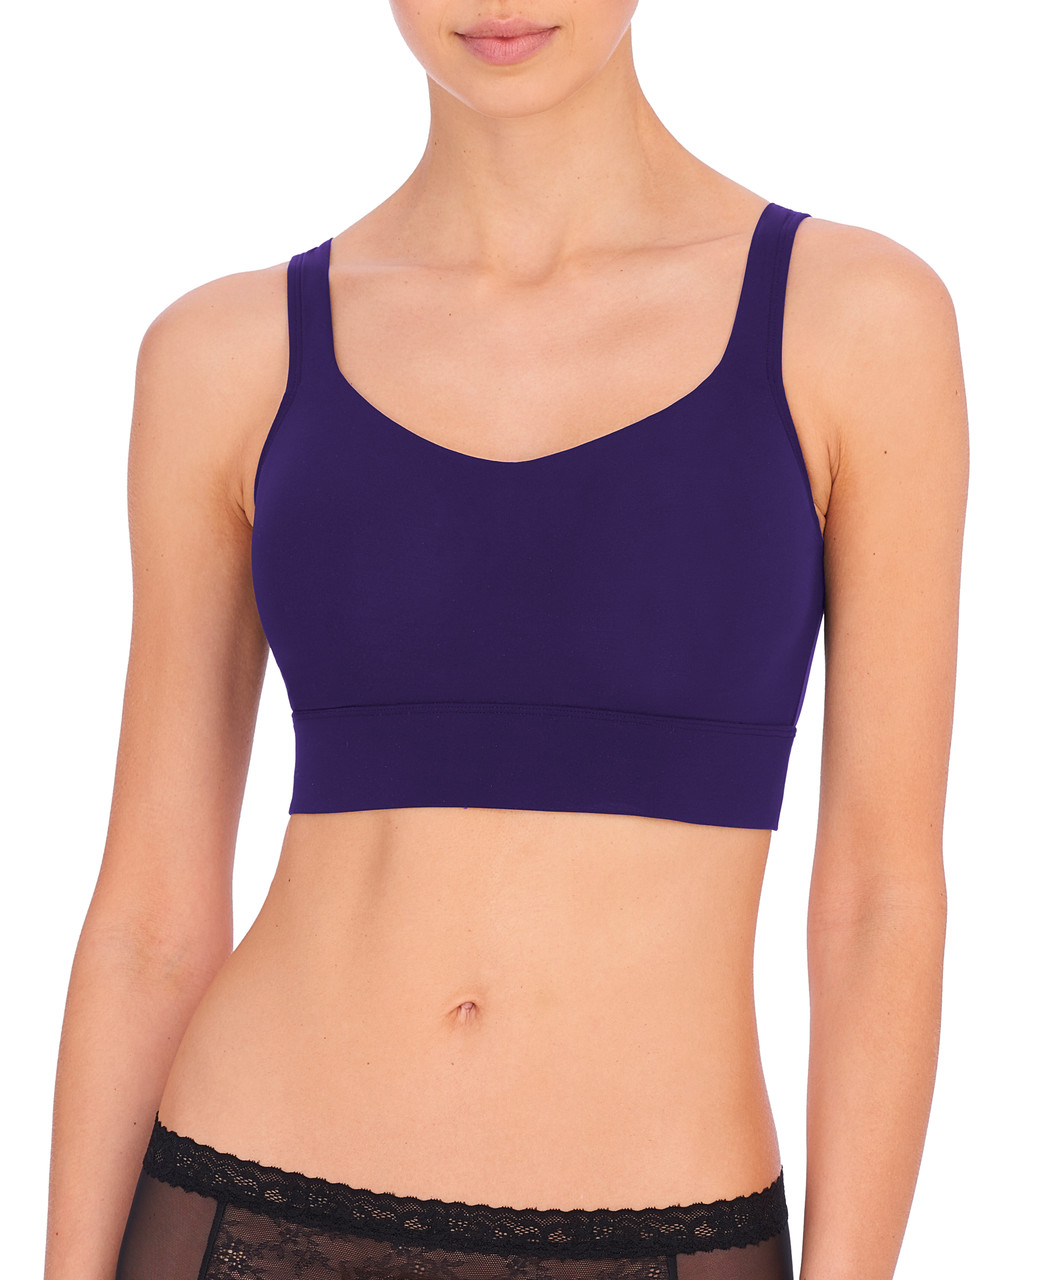 XS - Womens Light Support Contour Flex Ribbed Bra - All in Motion - Purple